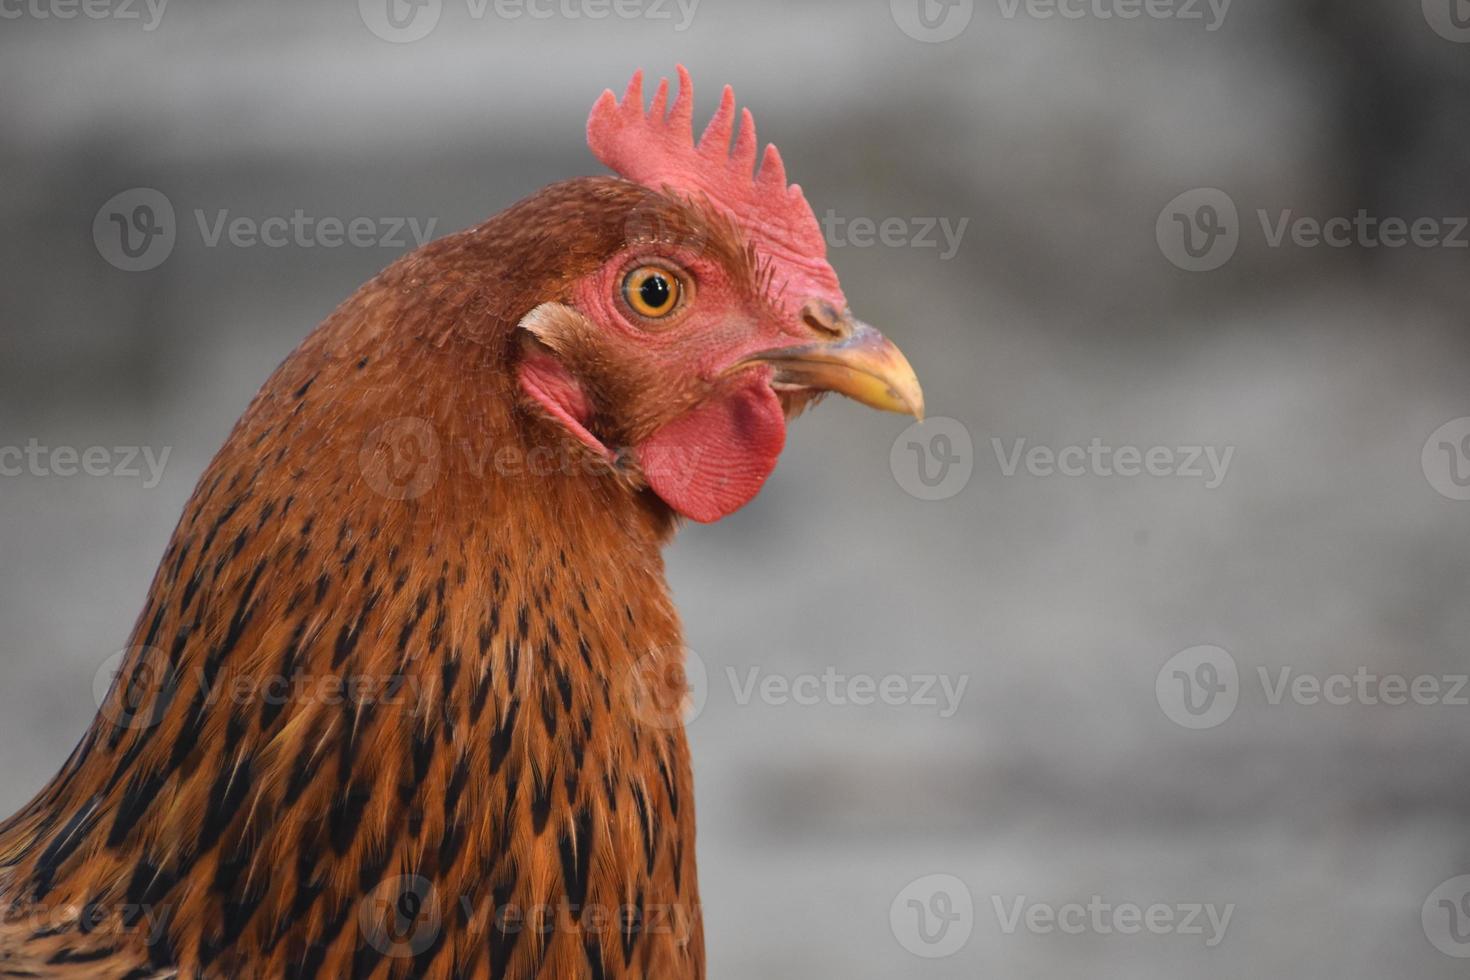 Brown hen face HD image photo